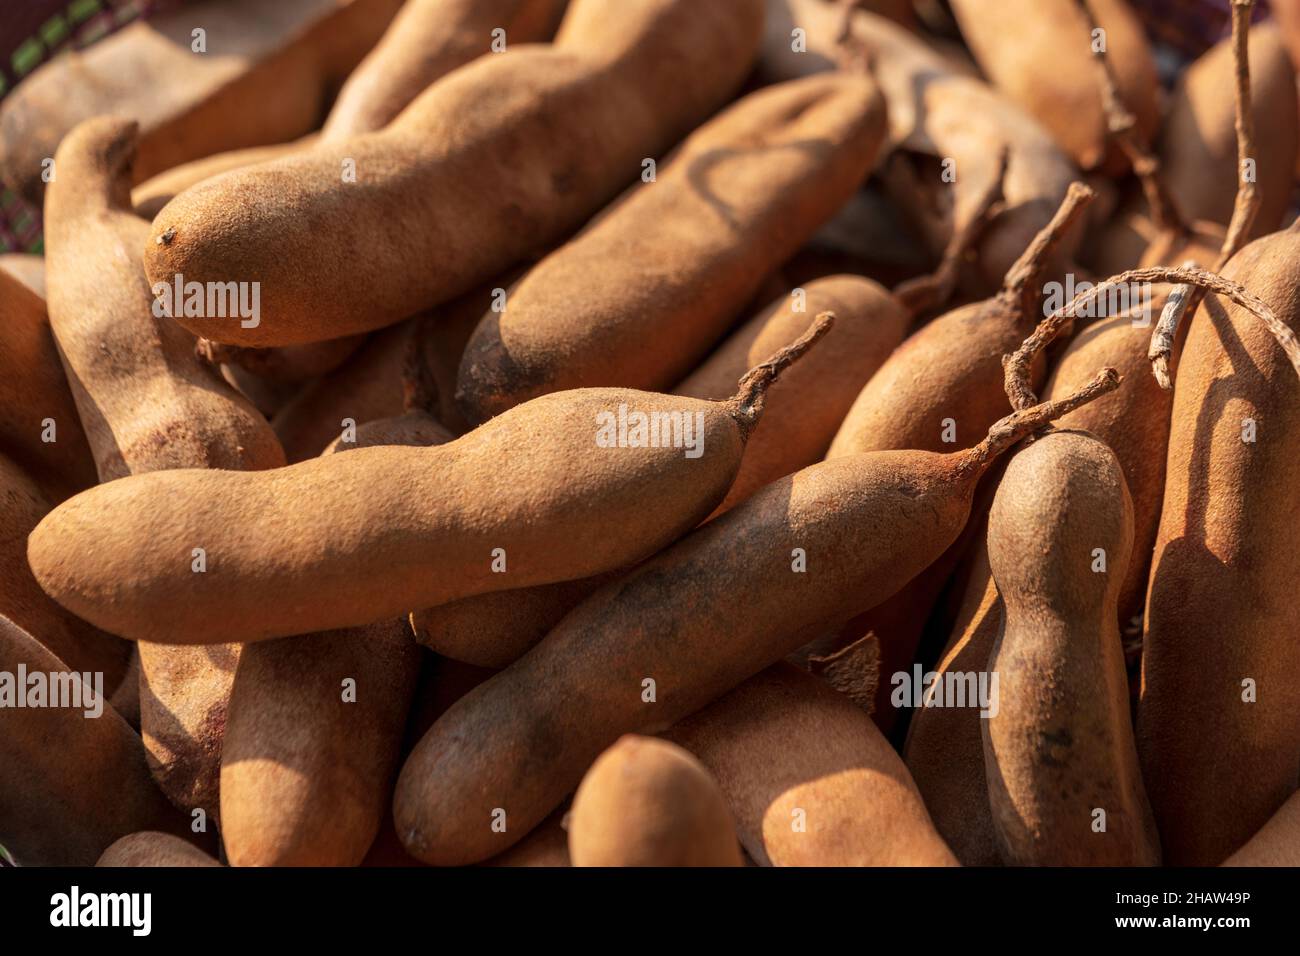 Pile of ripe tamarind fruits in a market place. Organic tamarind wallpaper background concept. Stock Photo